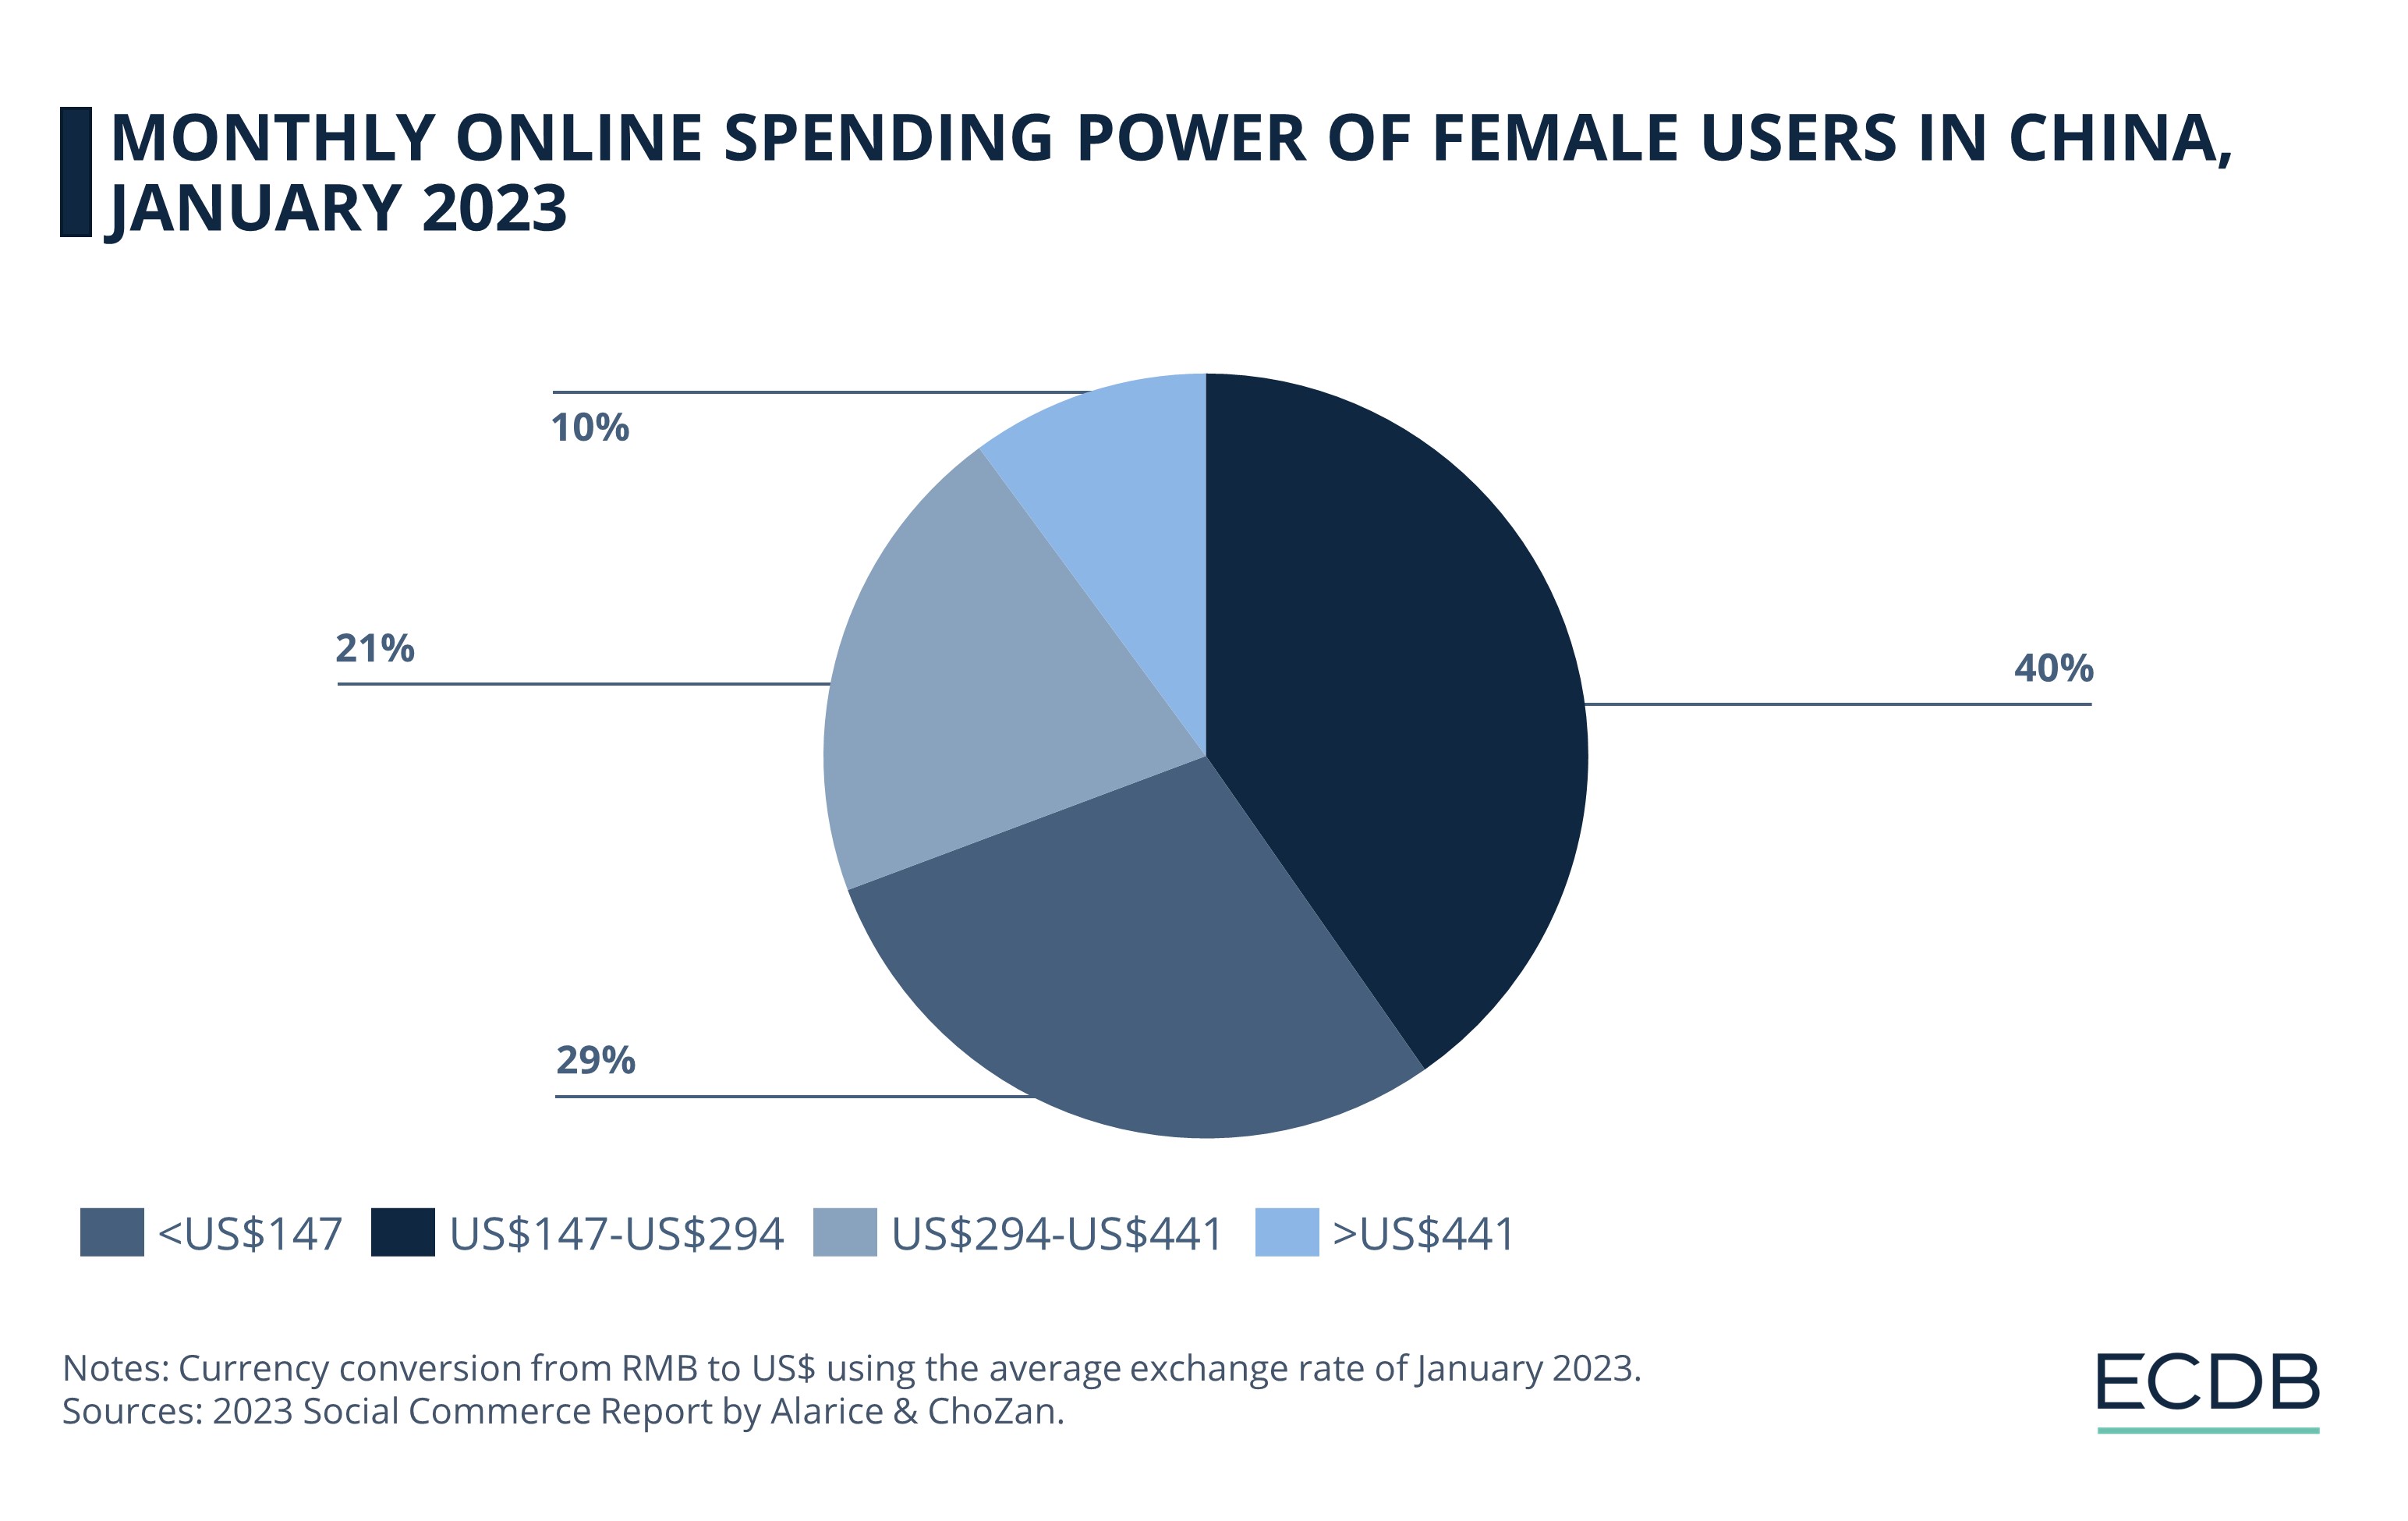 Monthly Online Spending Power of Female Users in China, January 2023